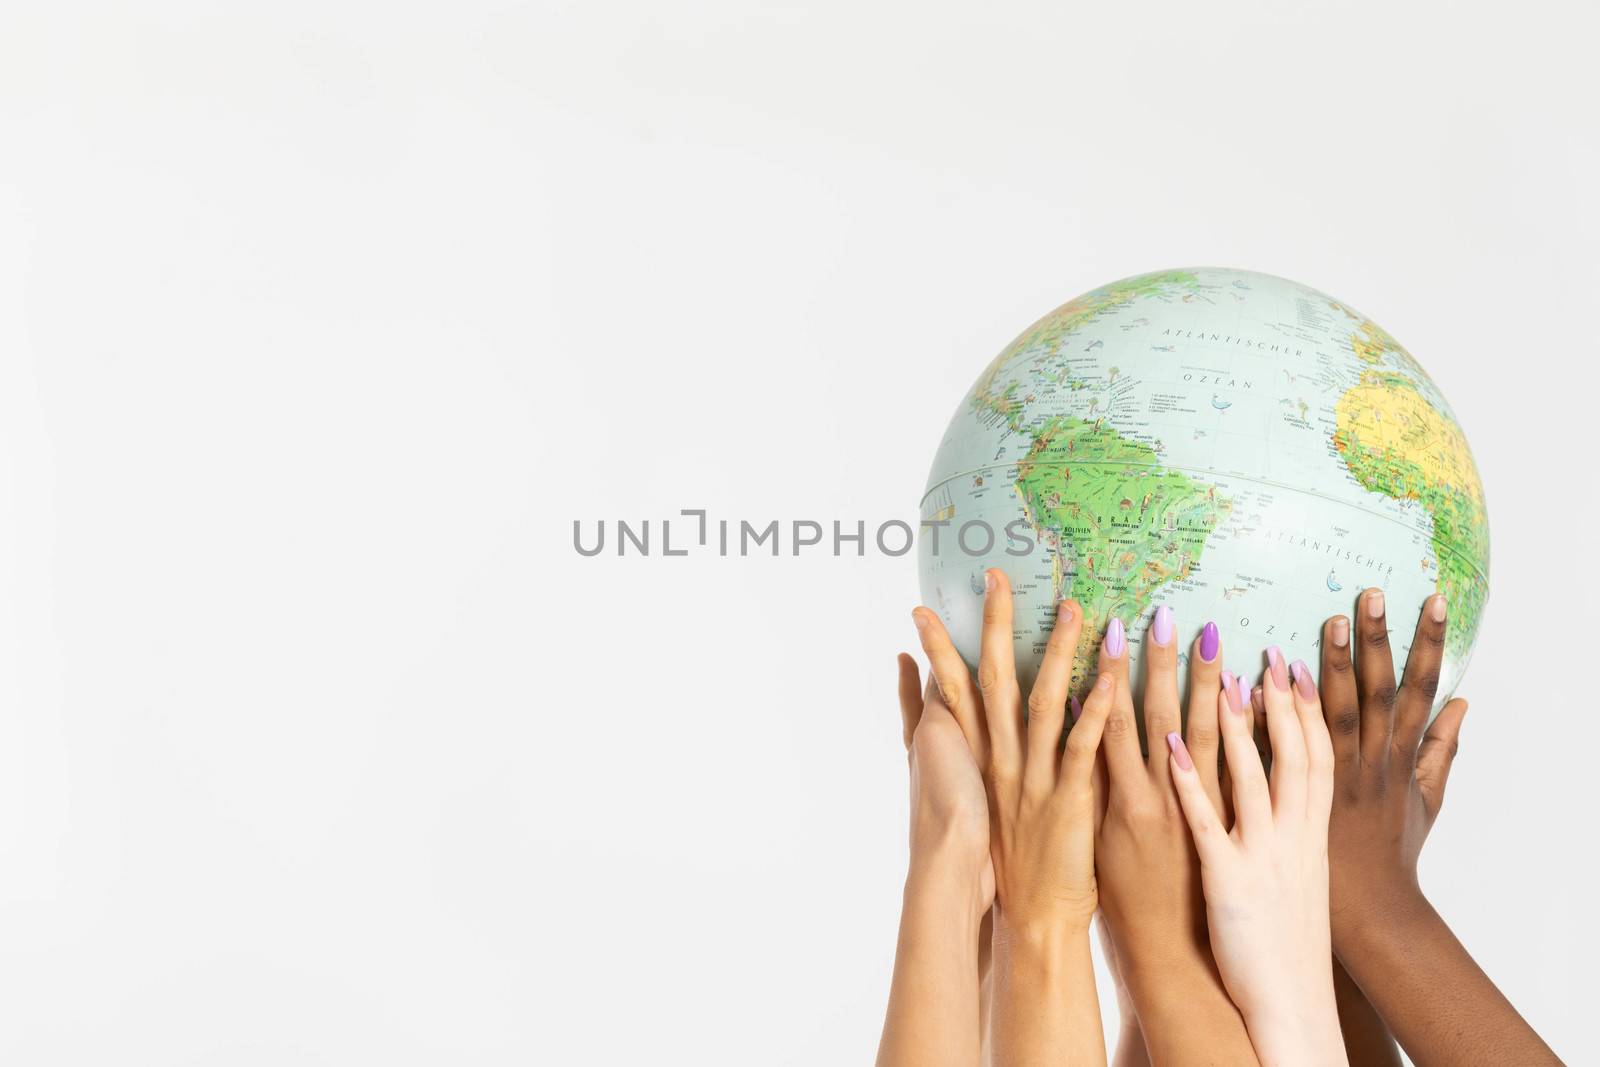 A large globe with all continents is supported by female hands of various races, symbolizing unity, acceptance and racial tolerance.